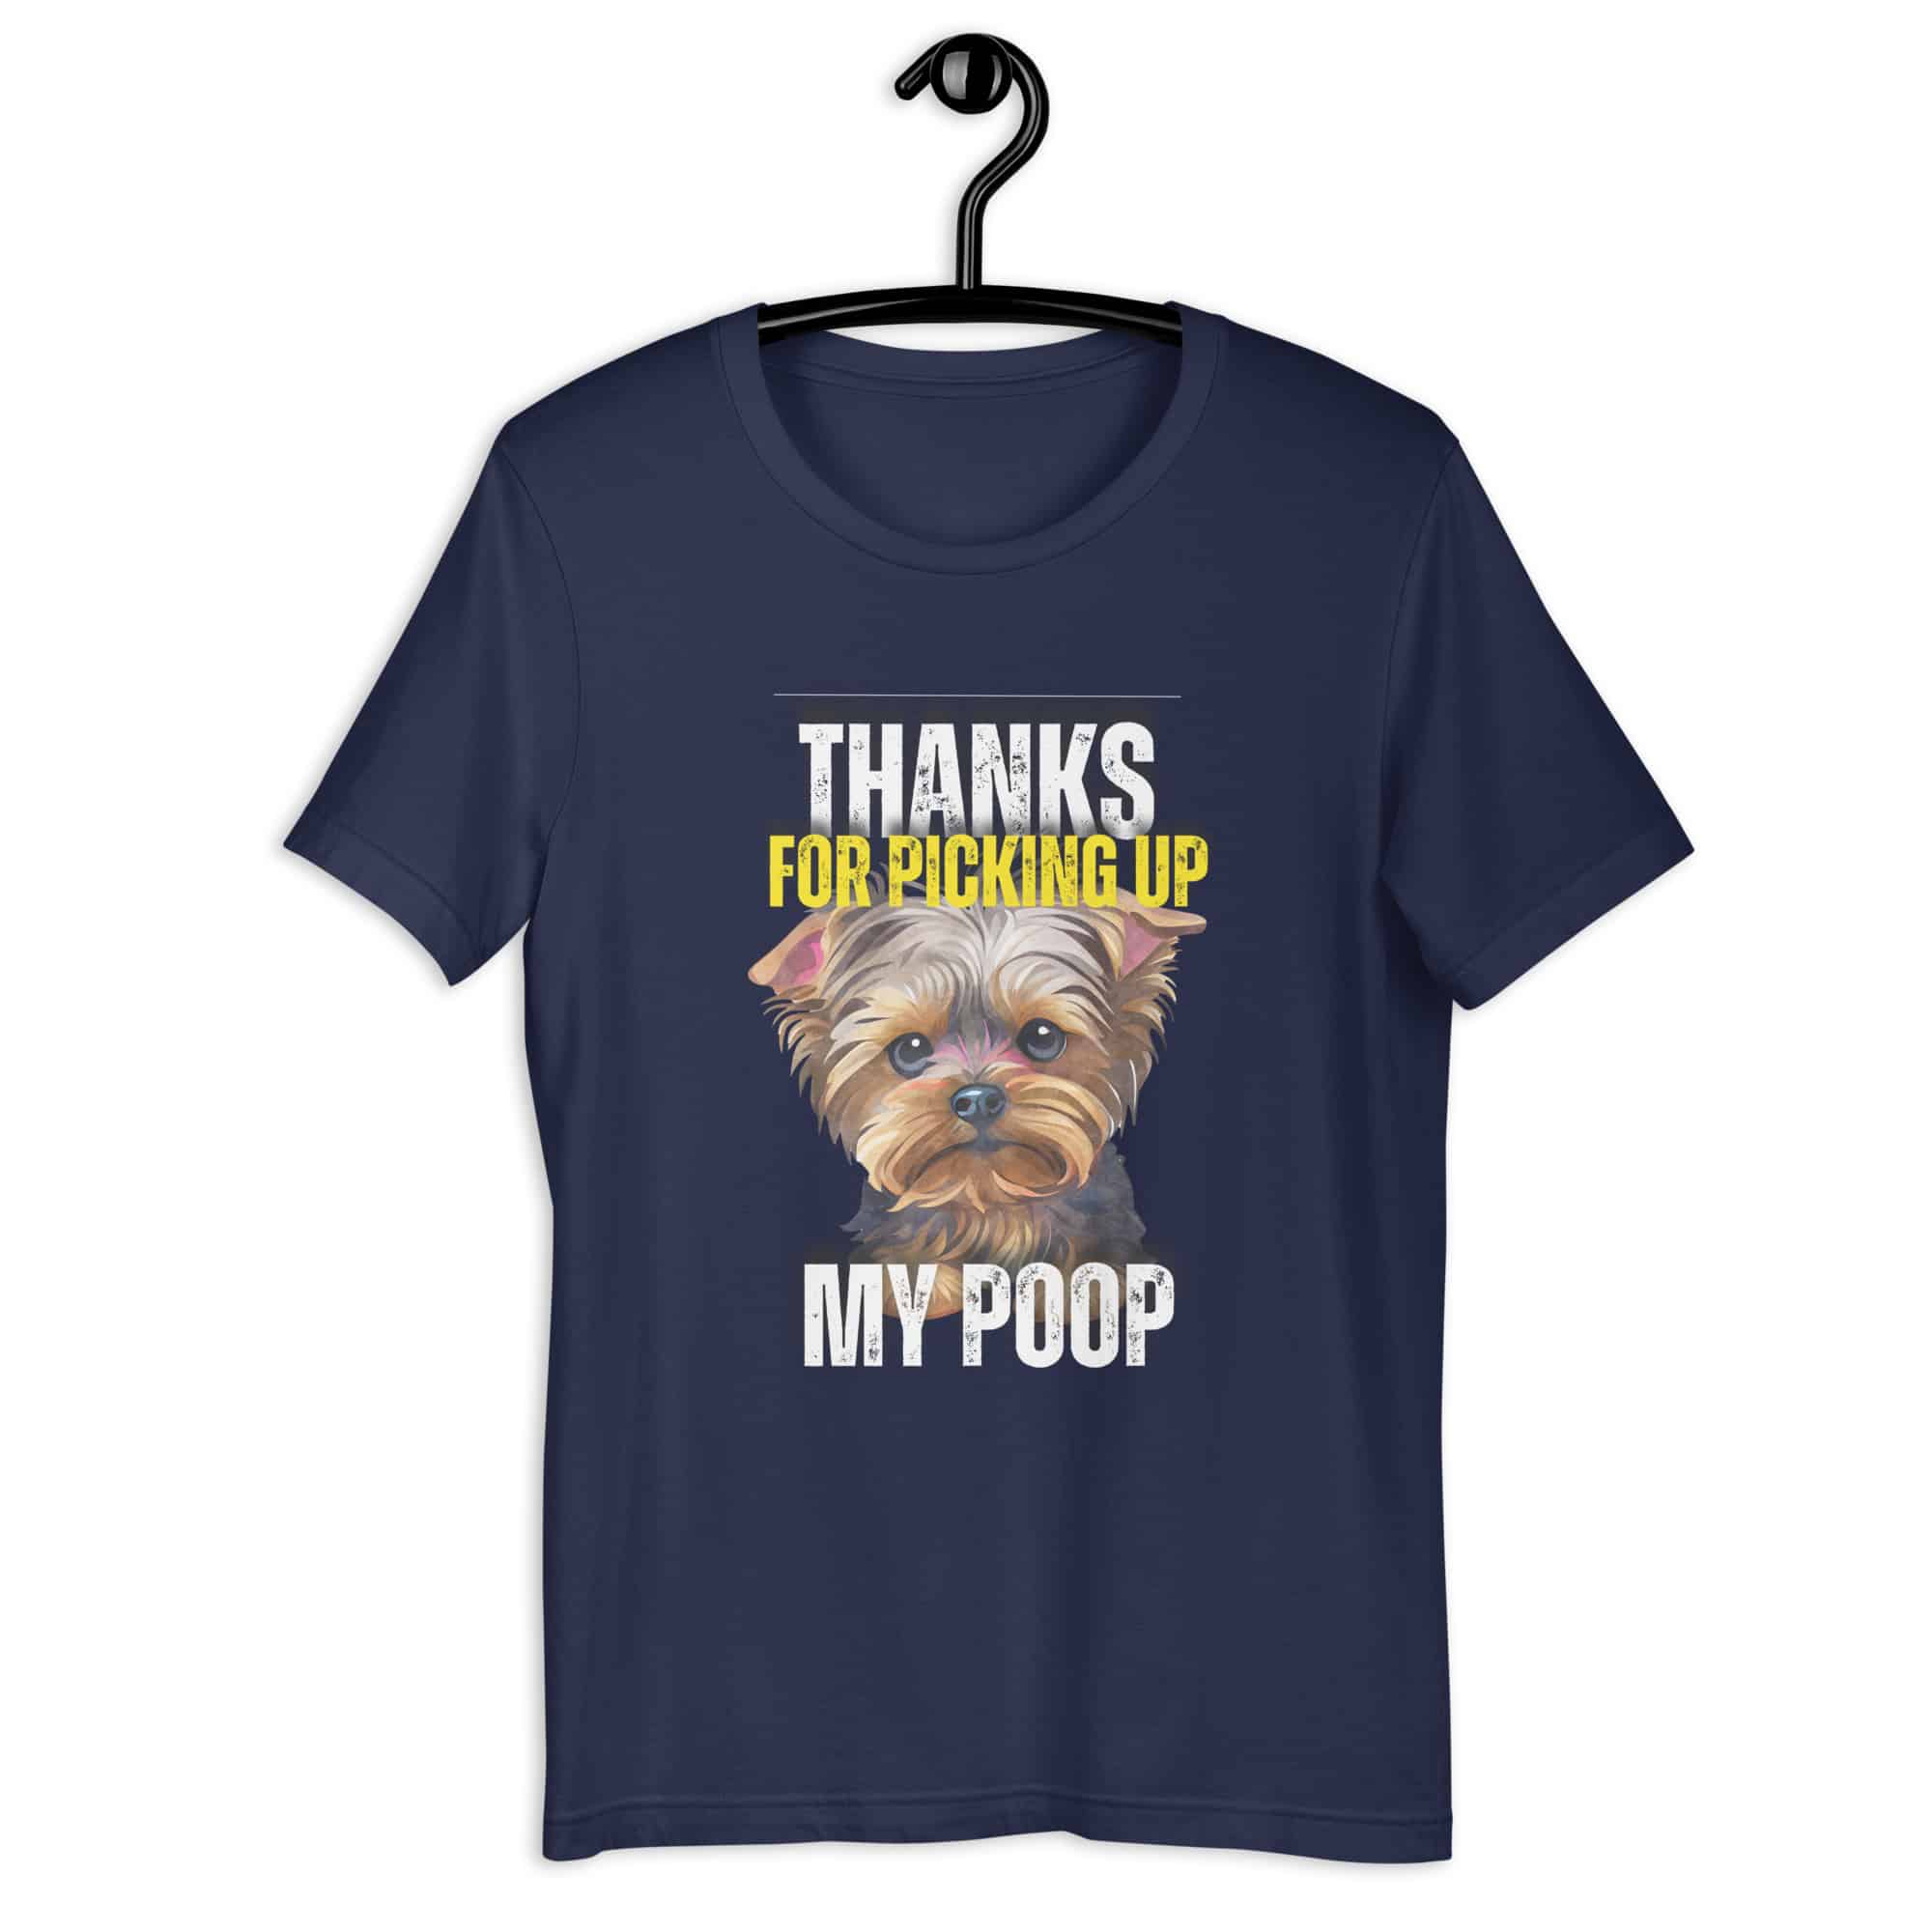 Thanks For Picking Up My POOP Funny Poodles Unisex T-Shirt. Navy